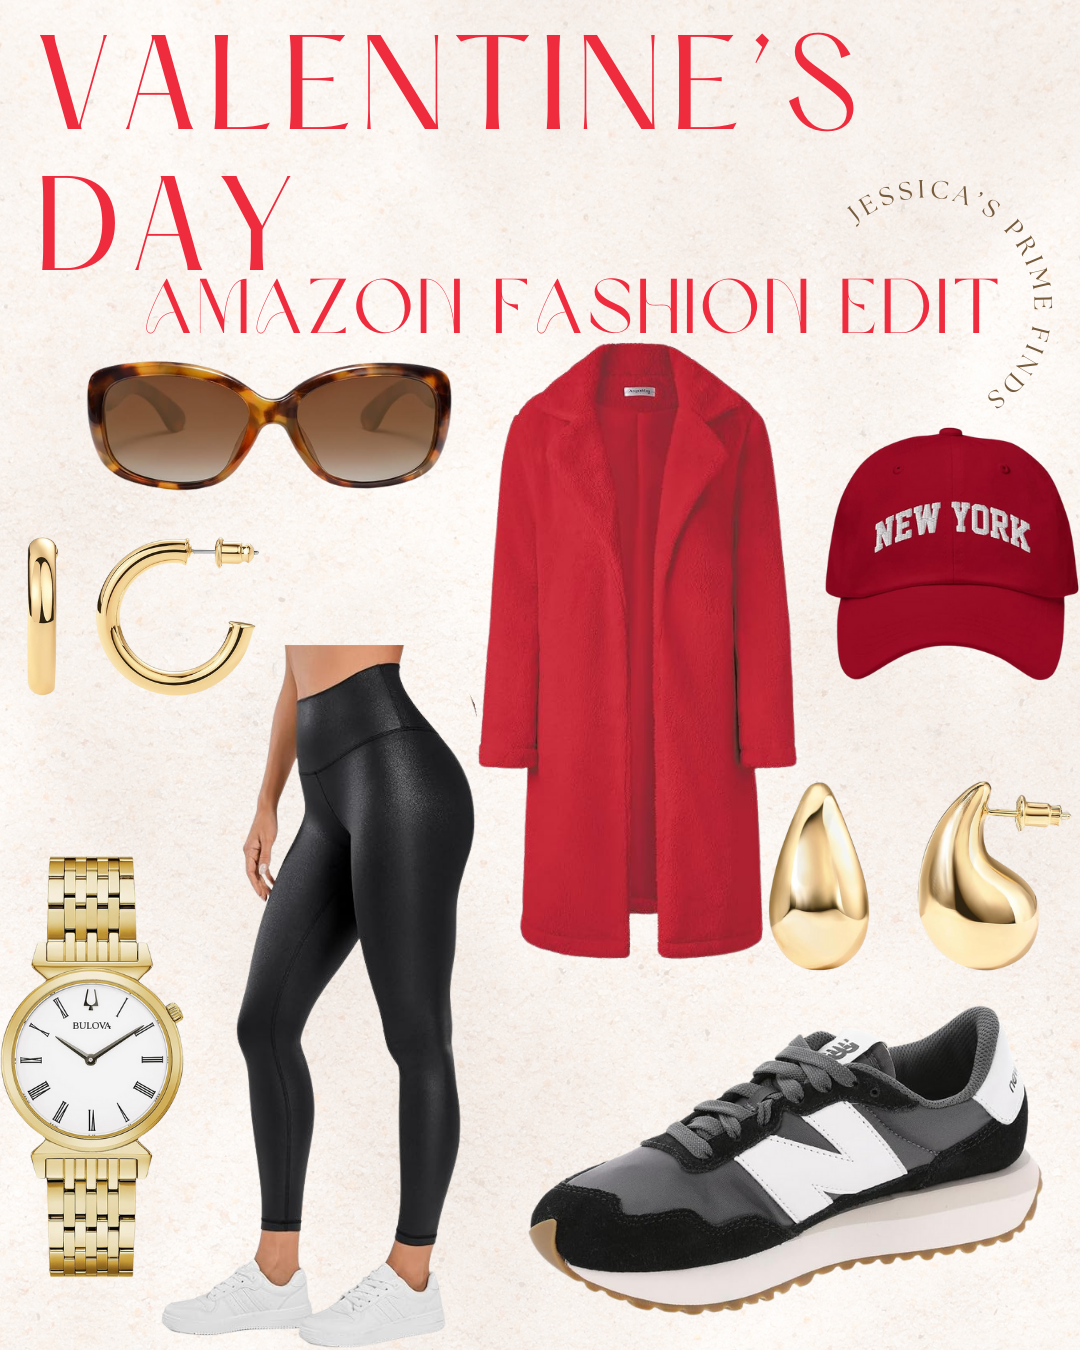 Valentine's Day Fashion Edit Amazon Fashion Athleisure Casual Date outfit